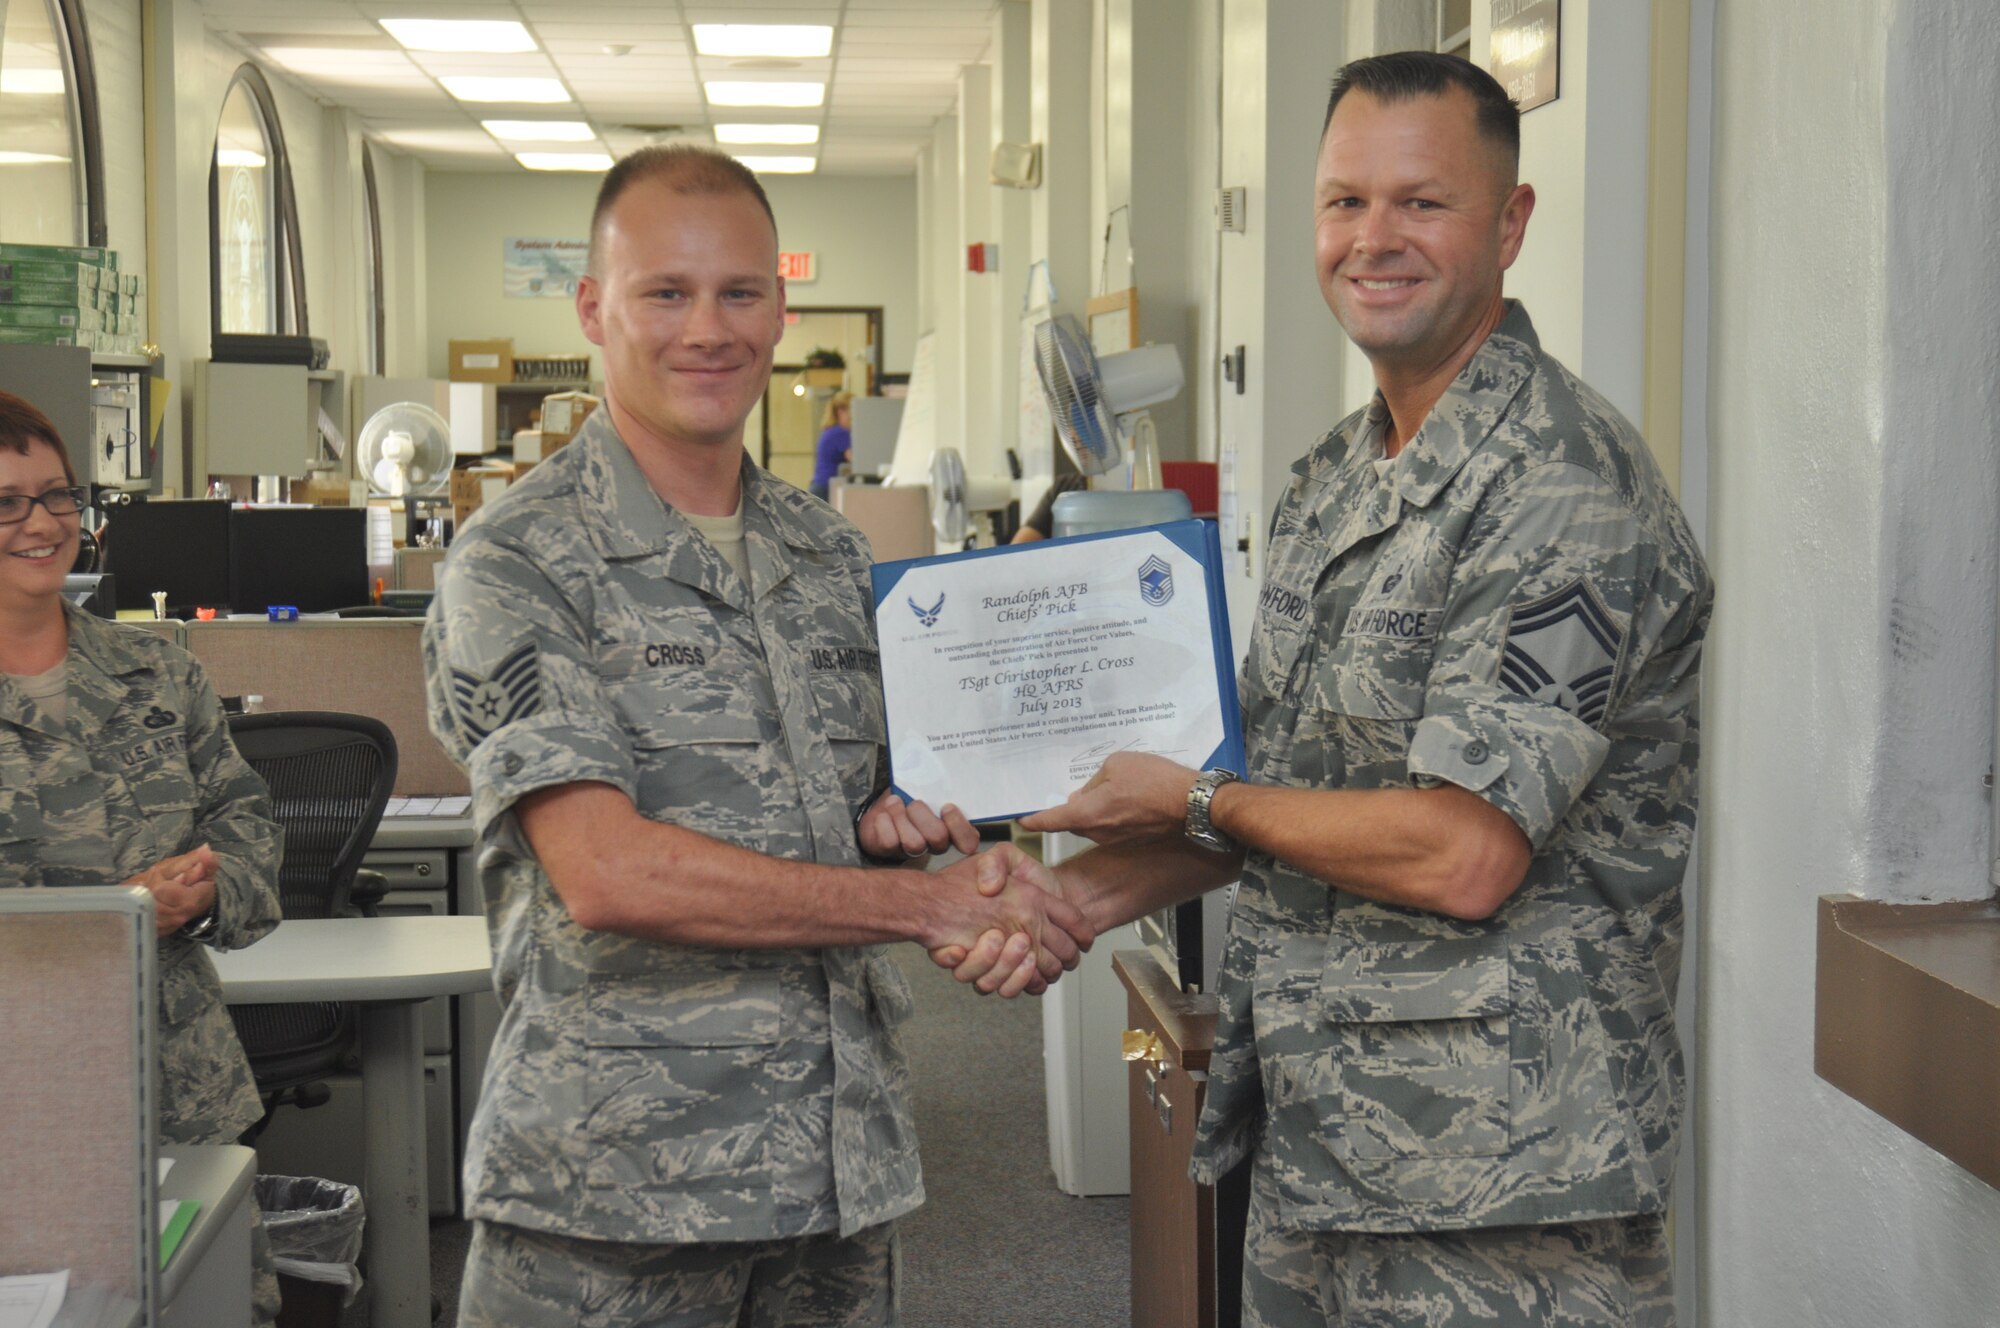 Tech. Sgt. Chris Cross, Air Force Recruiting Service knowledge operations manager (left), is presented with a Chief's Pick certificate and chief's coin from Senior Master Sgt. Steve Crawford, Joint Base San Antonio Chiefs' Group vice president, for his outstanding work and professionalism during the month of July. The Chief's Pick is presented to an Airman who demonstrates exceptional leadership, excellence and customer service. Cross was nominated and selected for his support of a critical AFRISS-TF workshop. AFRISS-TF is a single integrated recruiting system used in managing the recruiting process for Regular Air Force, Air National Guard and Air Force Reserve recruiters worldwide. His support enabled all three air components and the development team to work in a collaborative environment that would not have been possible without his support. Crawford is a chief selectee. (U.S. Air Force photo/Staff Sgt. Hillary Stonemetz)